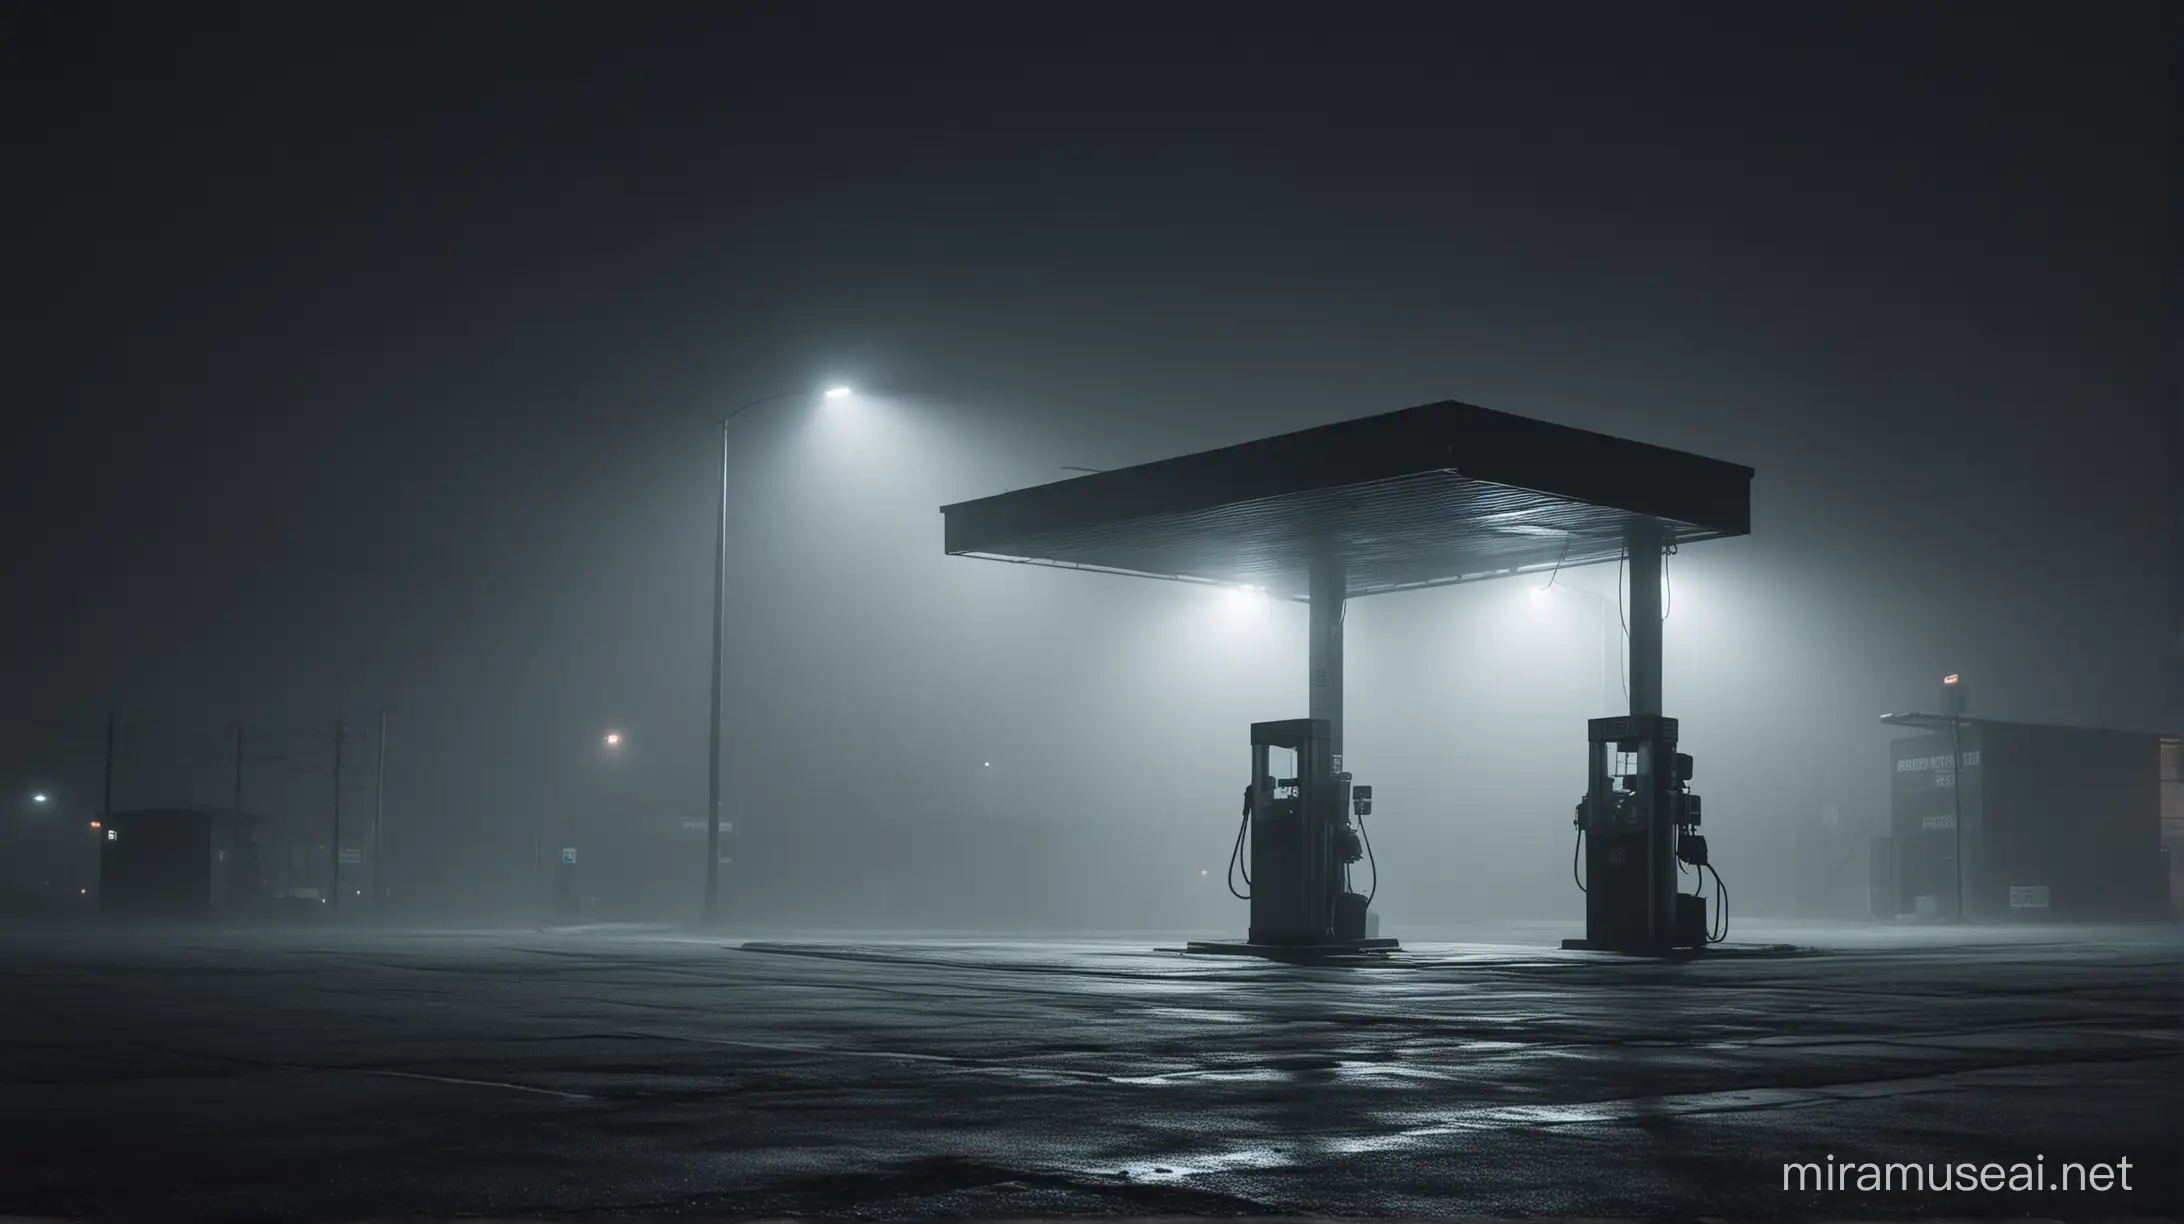 For this story, a suitable picture would be one depicting a dark gas station surrounded by fog and the darkness of the night. You can choose an image showing illuminated gas pumps in the distance, while nearby, there is a silhouette of a warehouse or some object that creates a sense of abandonment and mystery. Additionally, adding some details like a shadow or something eerie in the corner of the picture can further enhance the atmosphere of tension and fear.